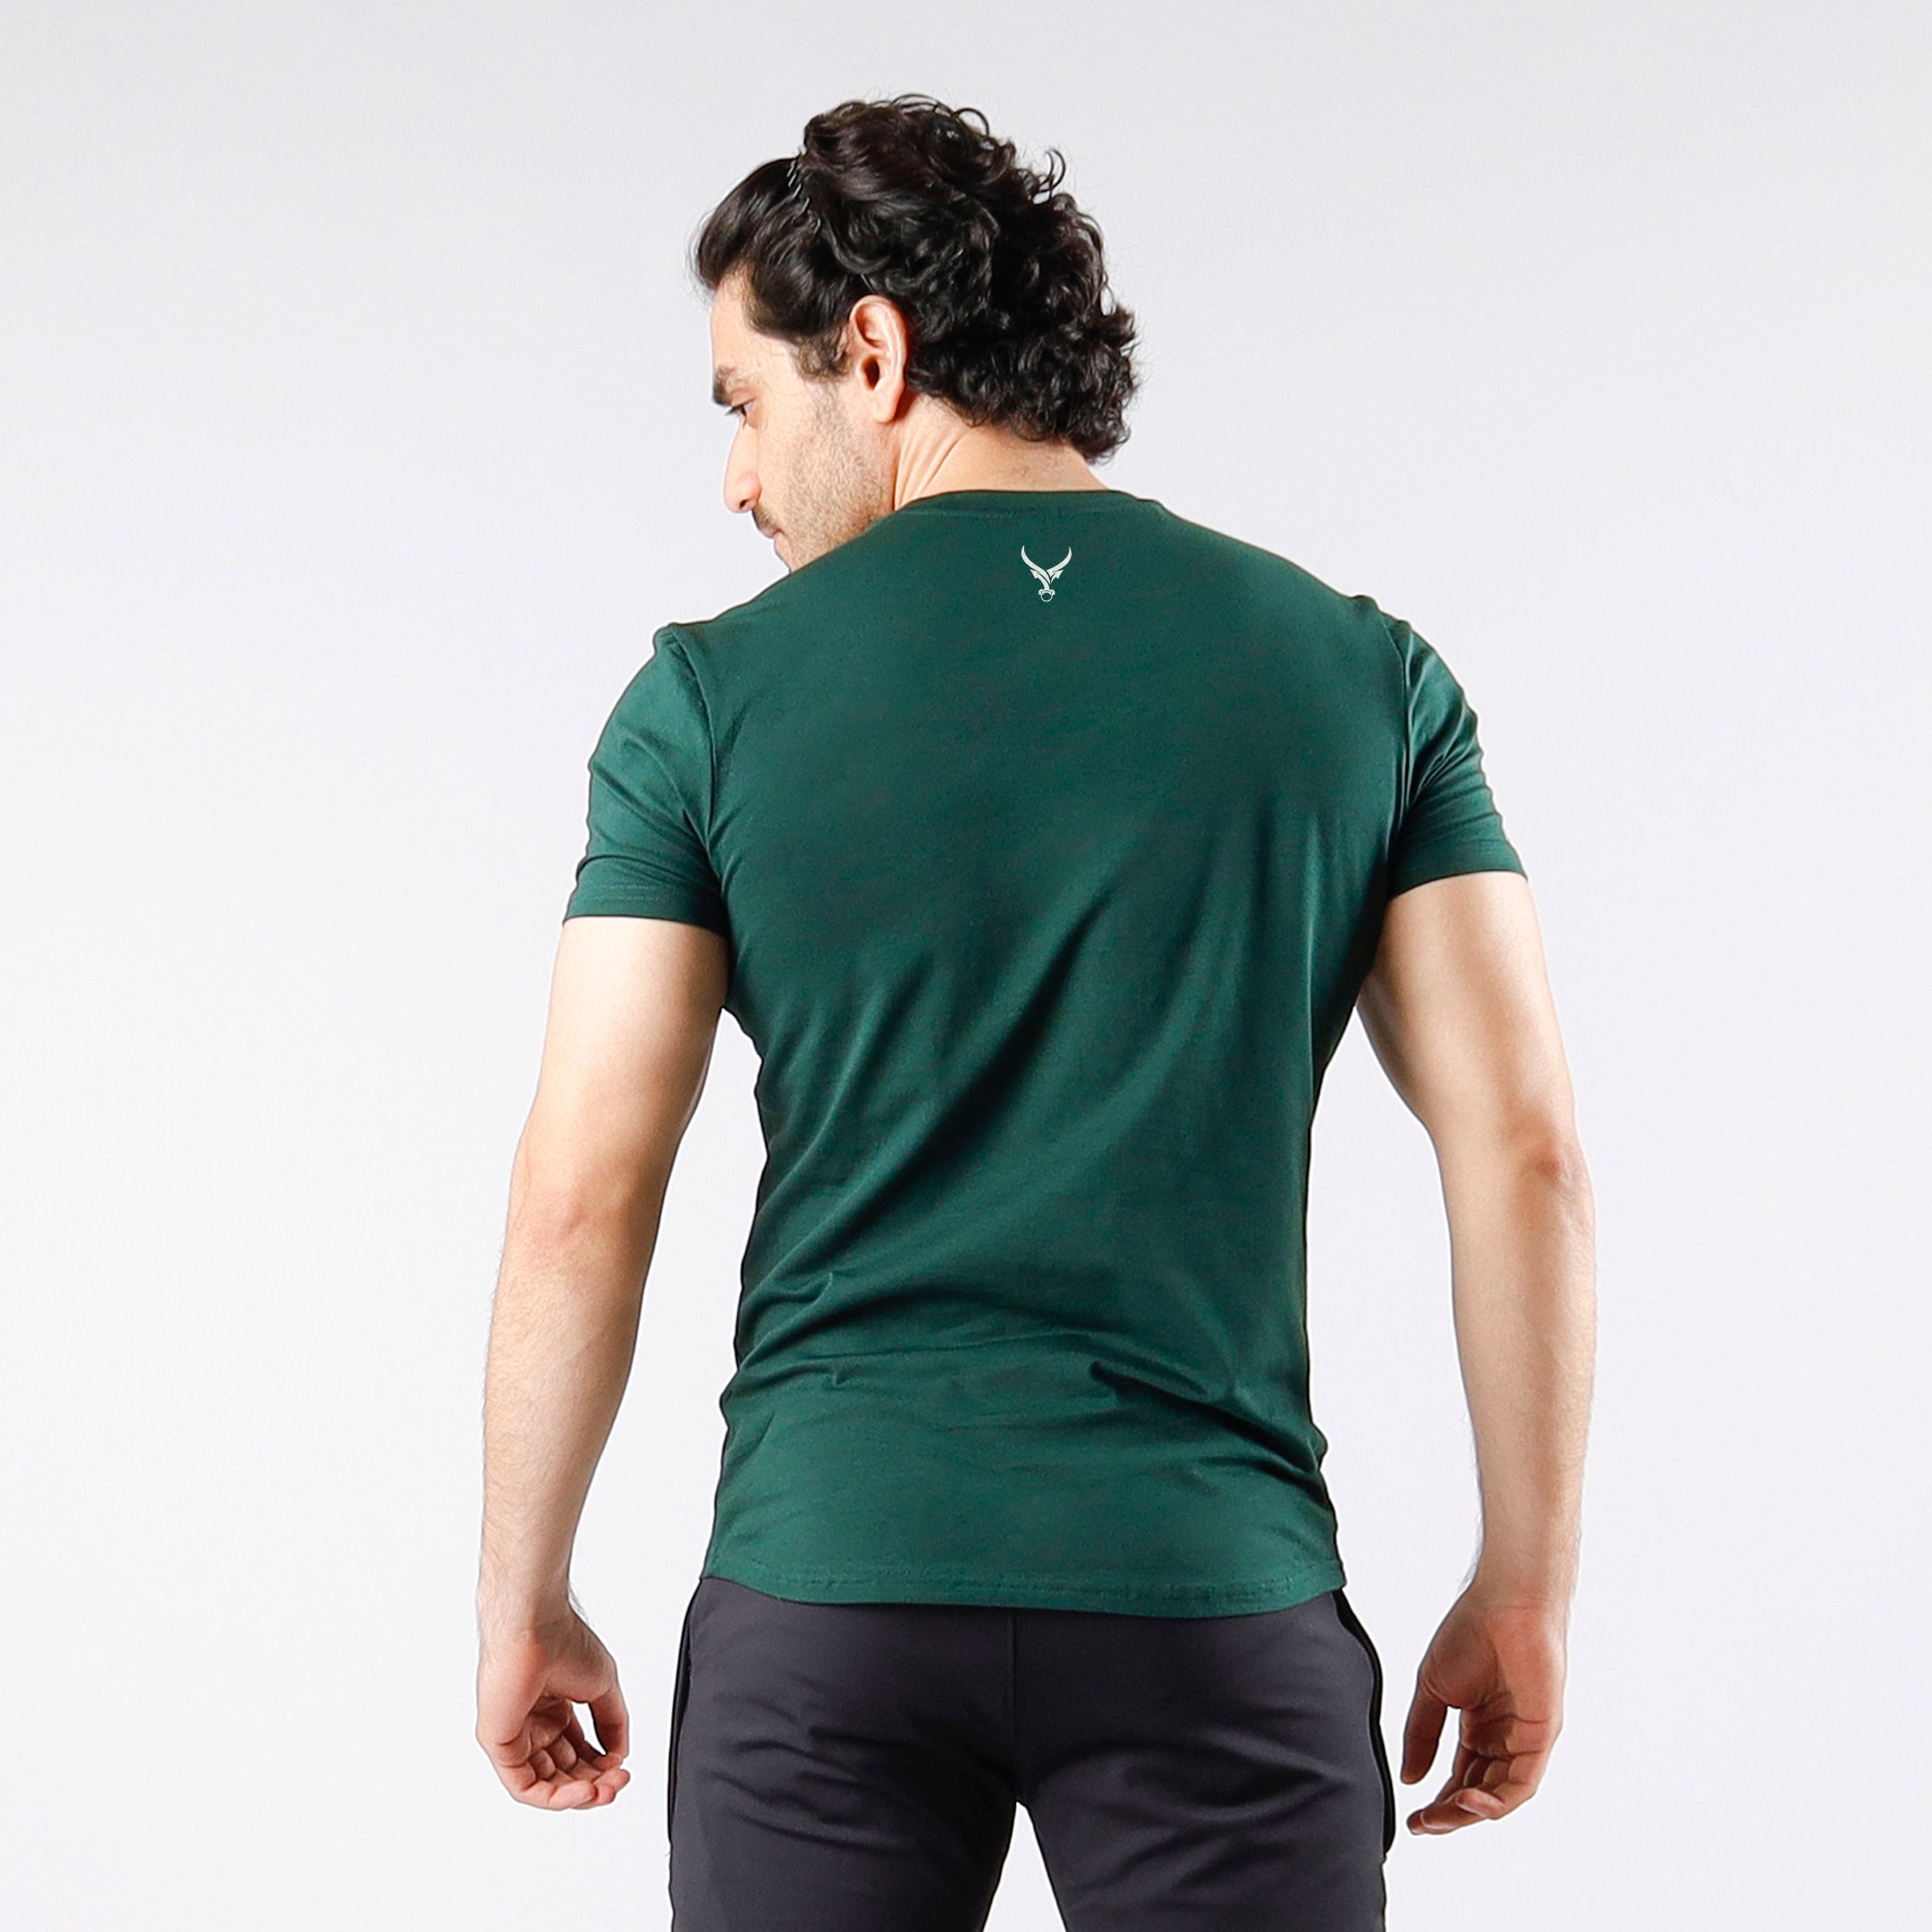 Athlete Tee For Mens